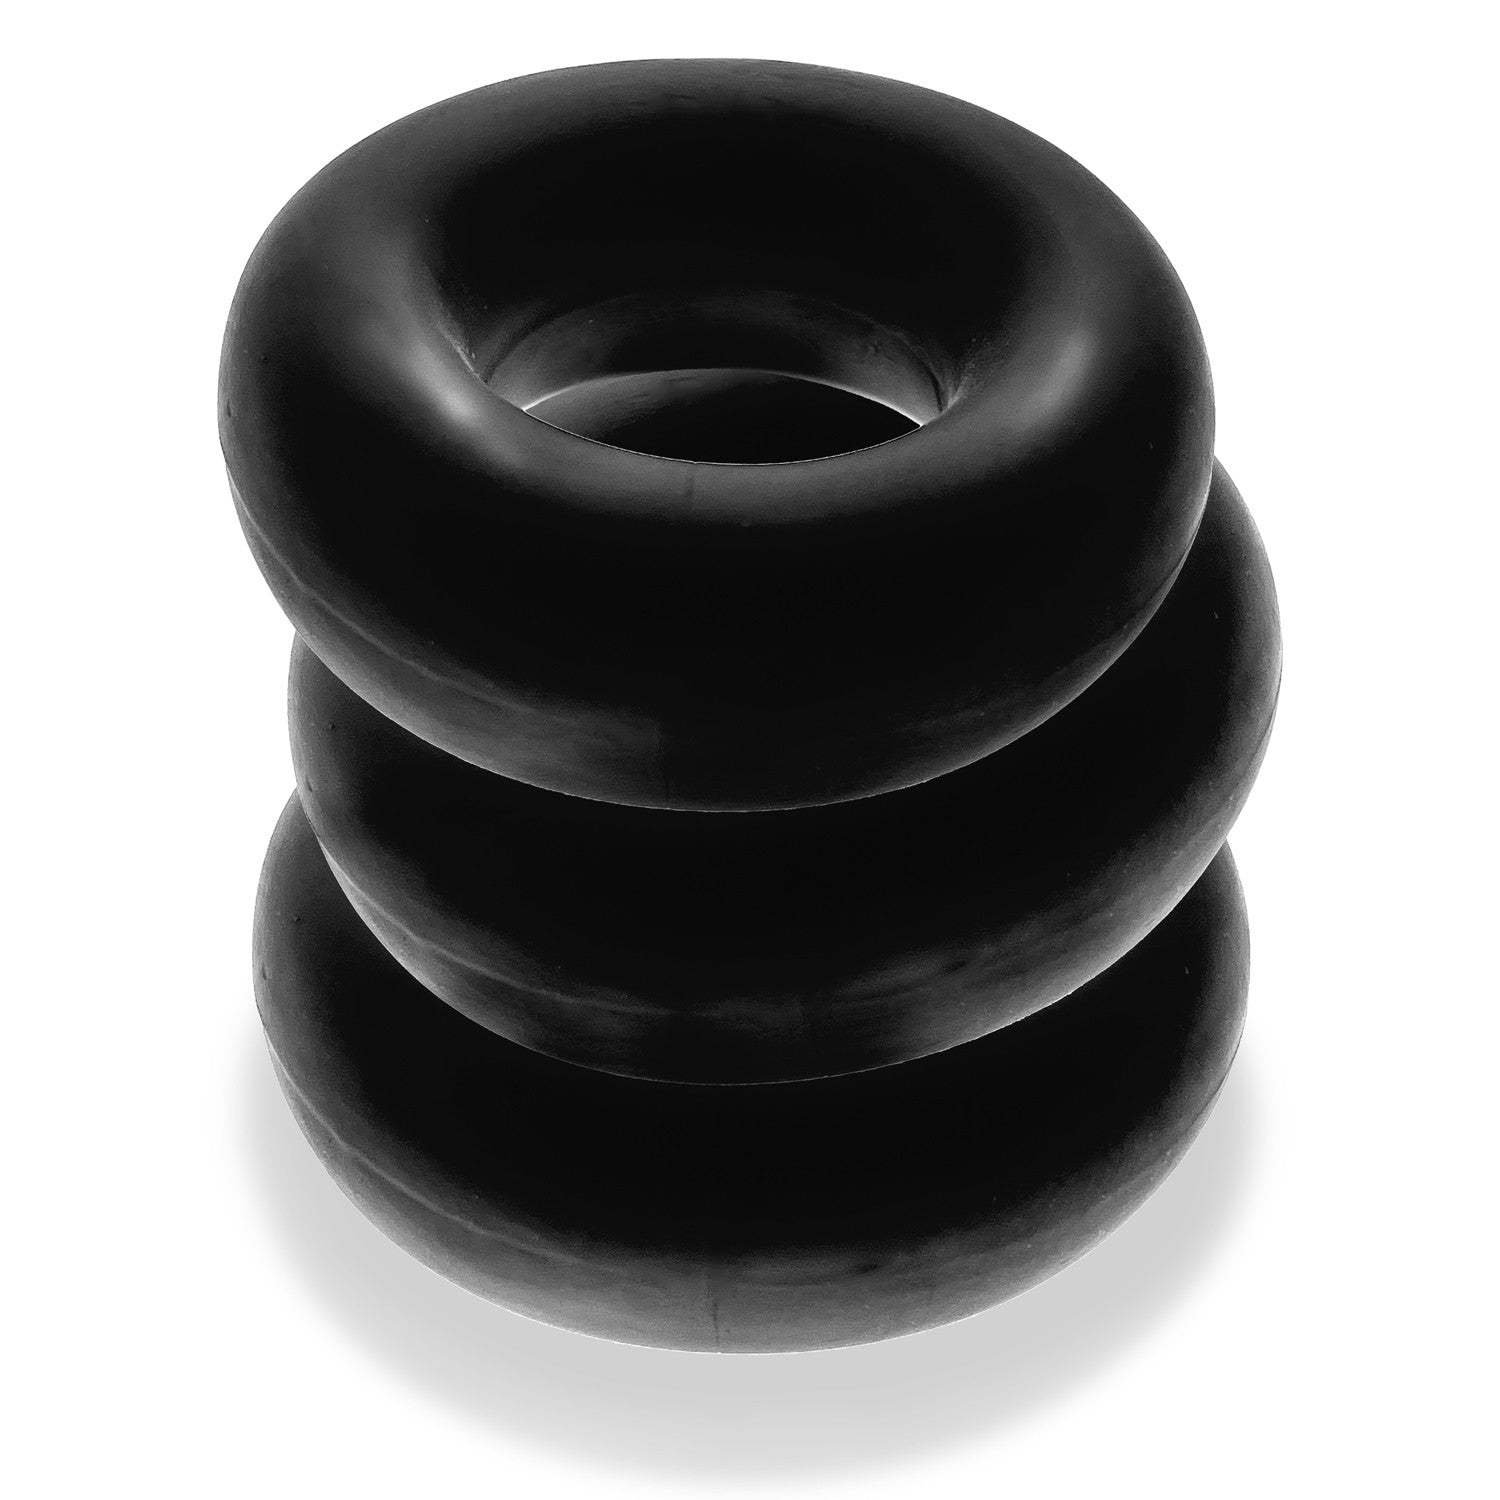 FAT WILLY RINGS - Black (7565046874351)